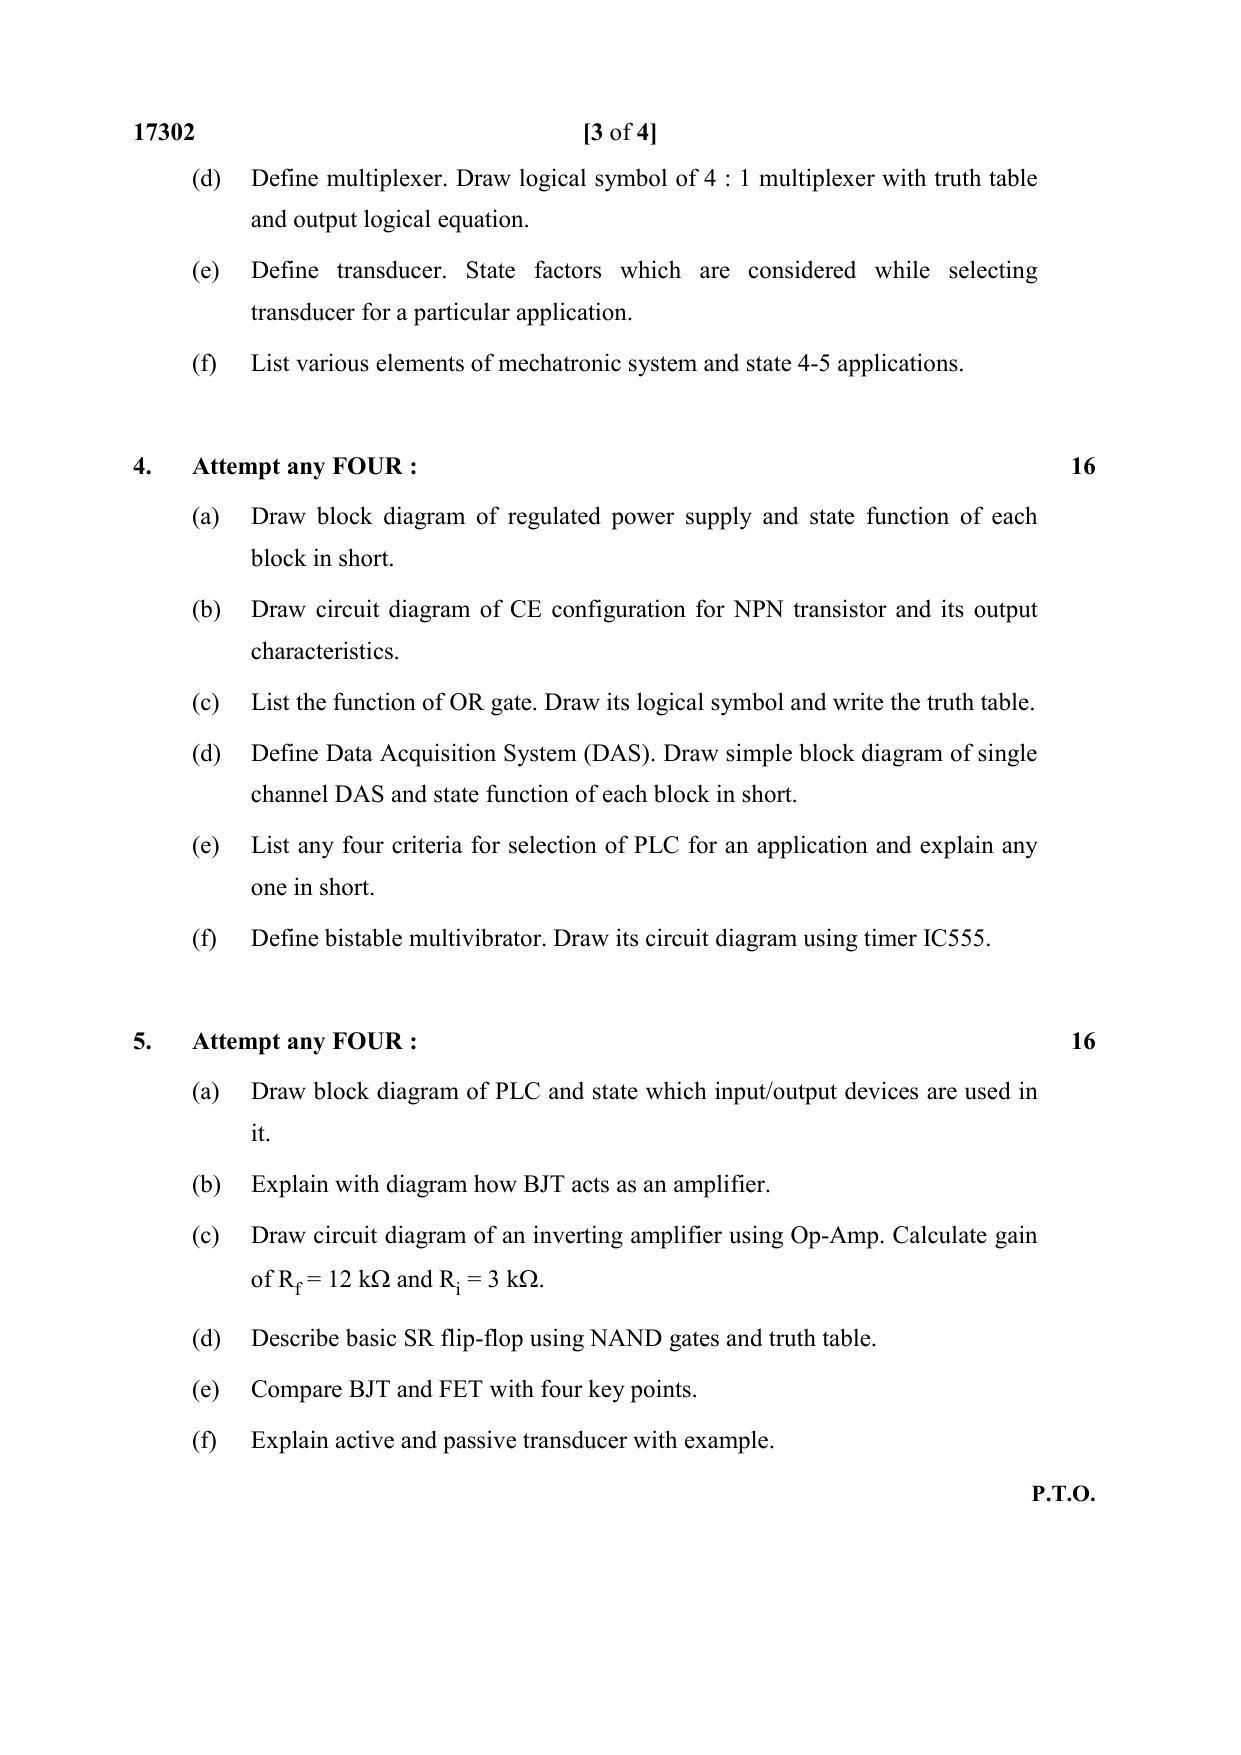 MSBTE Winter Question Paper 2019 - Basic Electronics and Mechatronics - Page 3